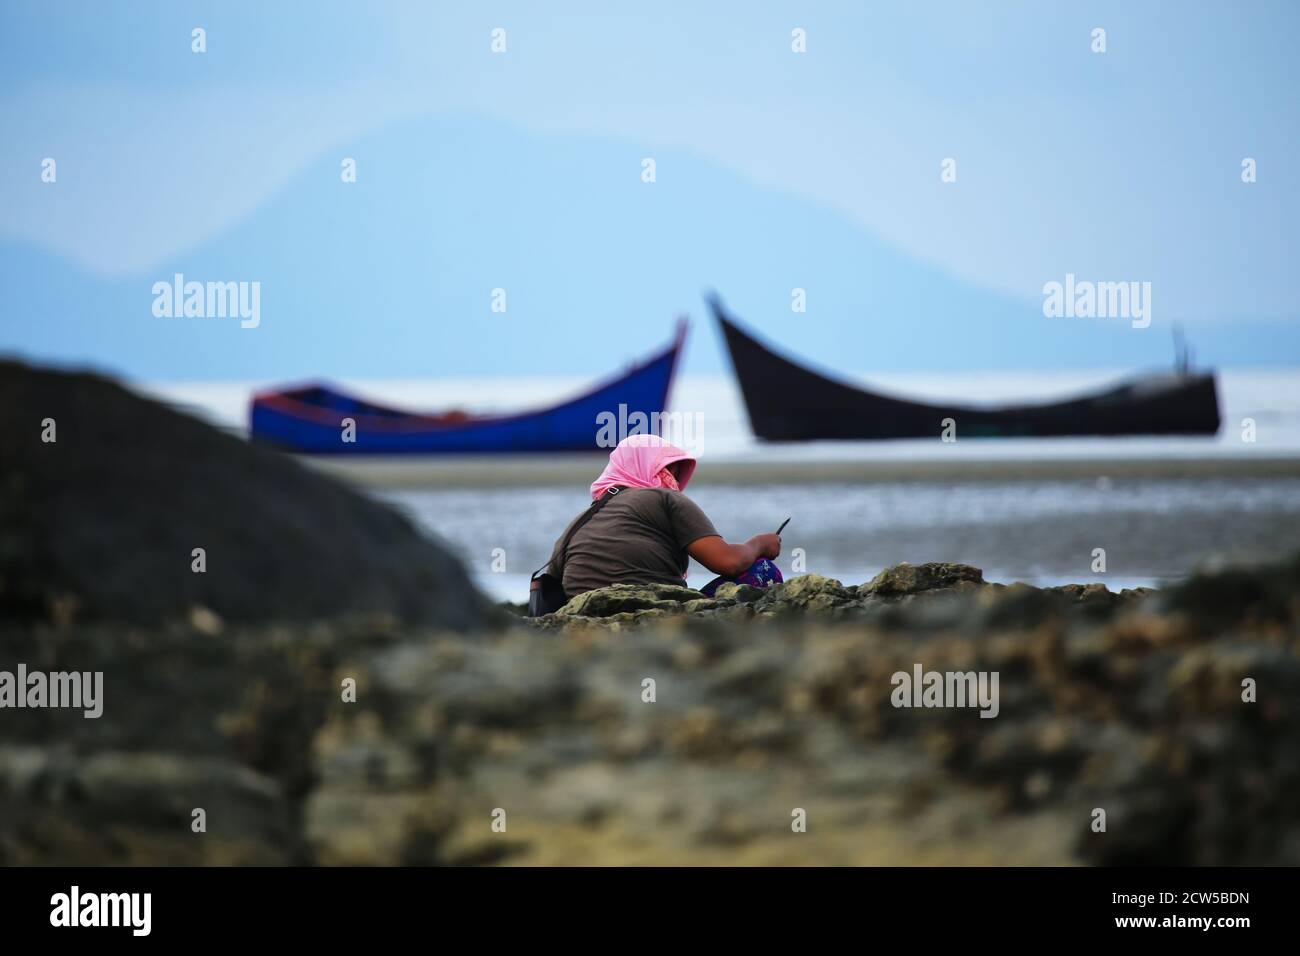 Residents of Banda Aceh, Indonesia, who live on the coast, are working to make a living on tidal beaches, during the COVID-19 pandemic Stock Photo